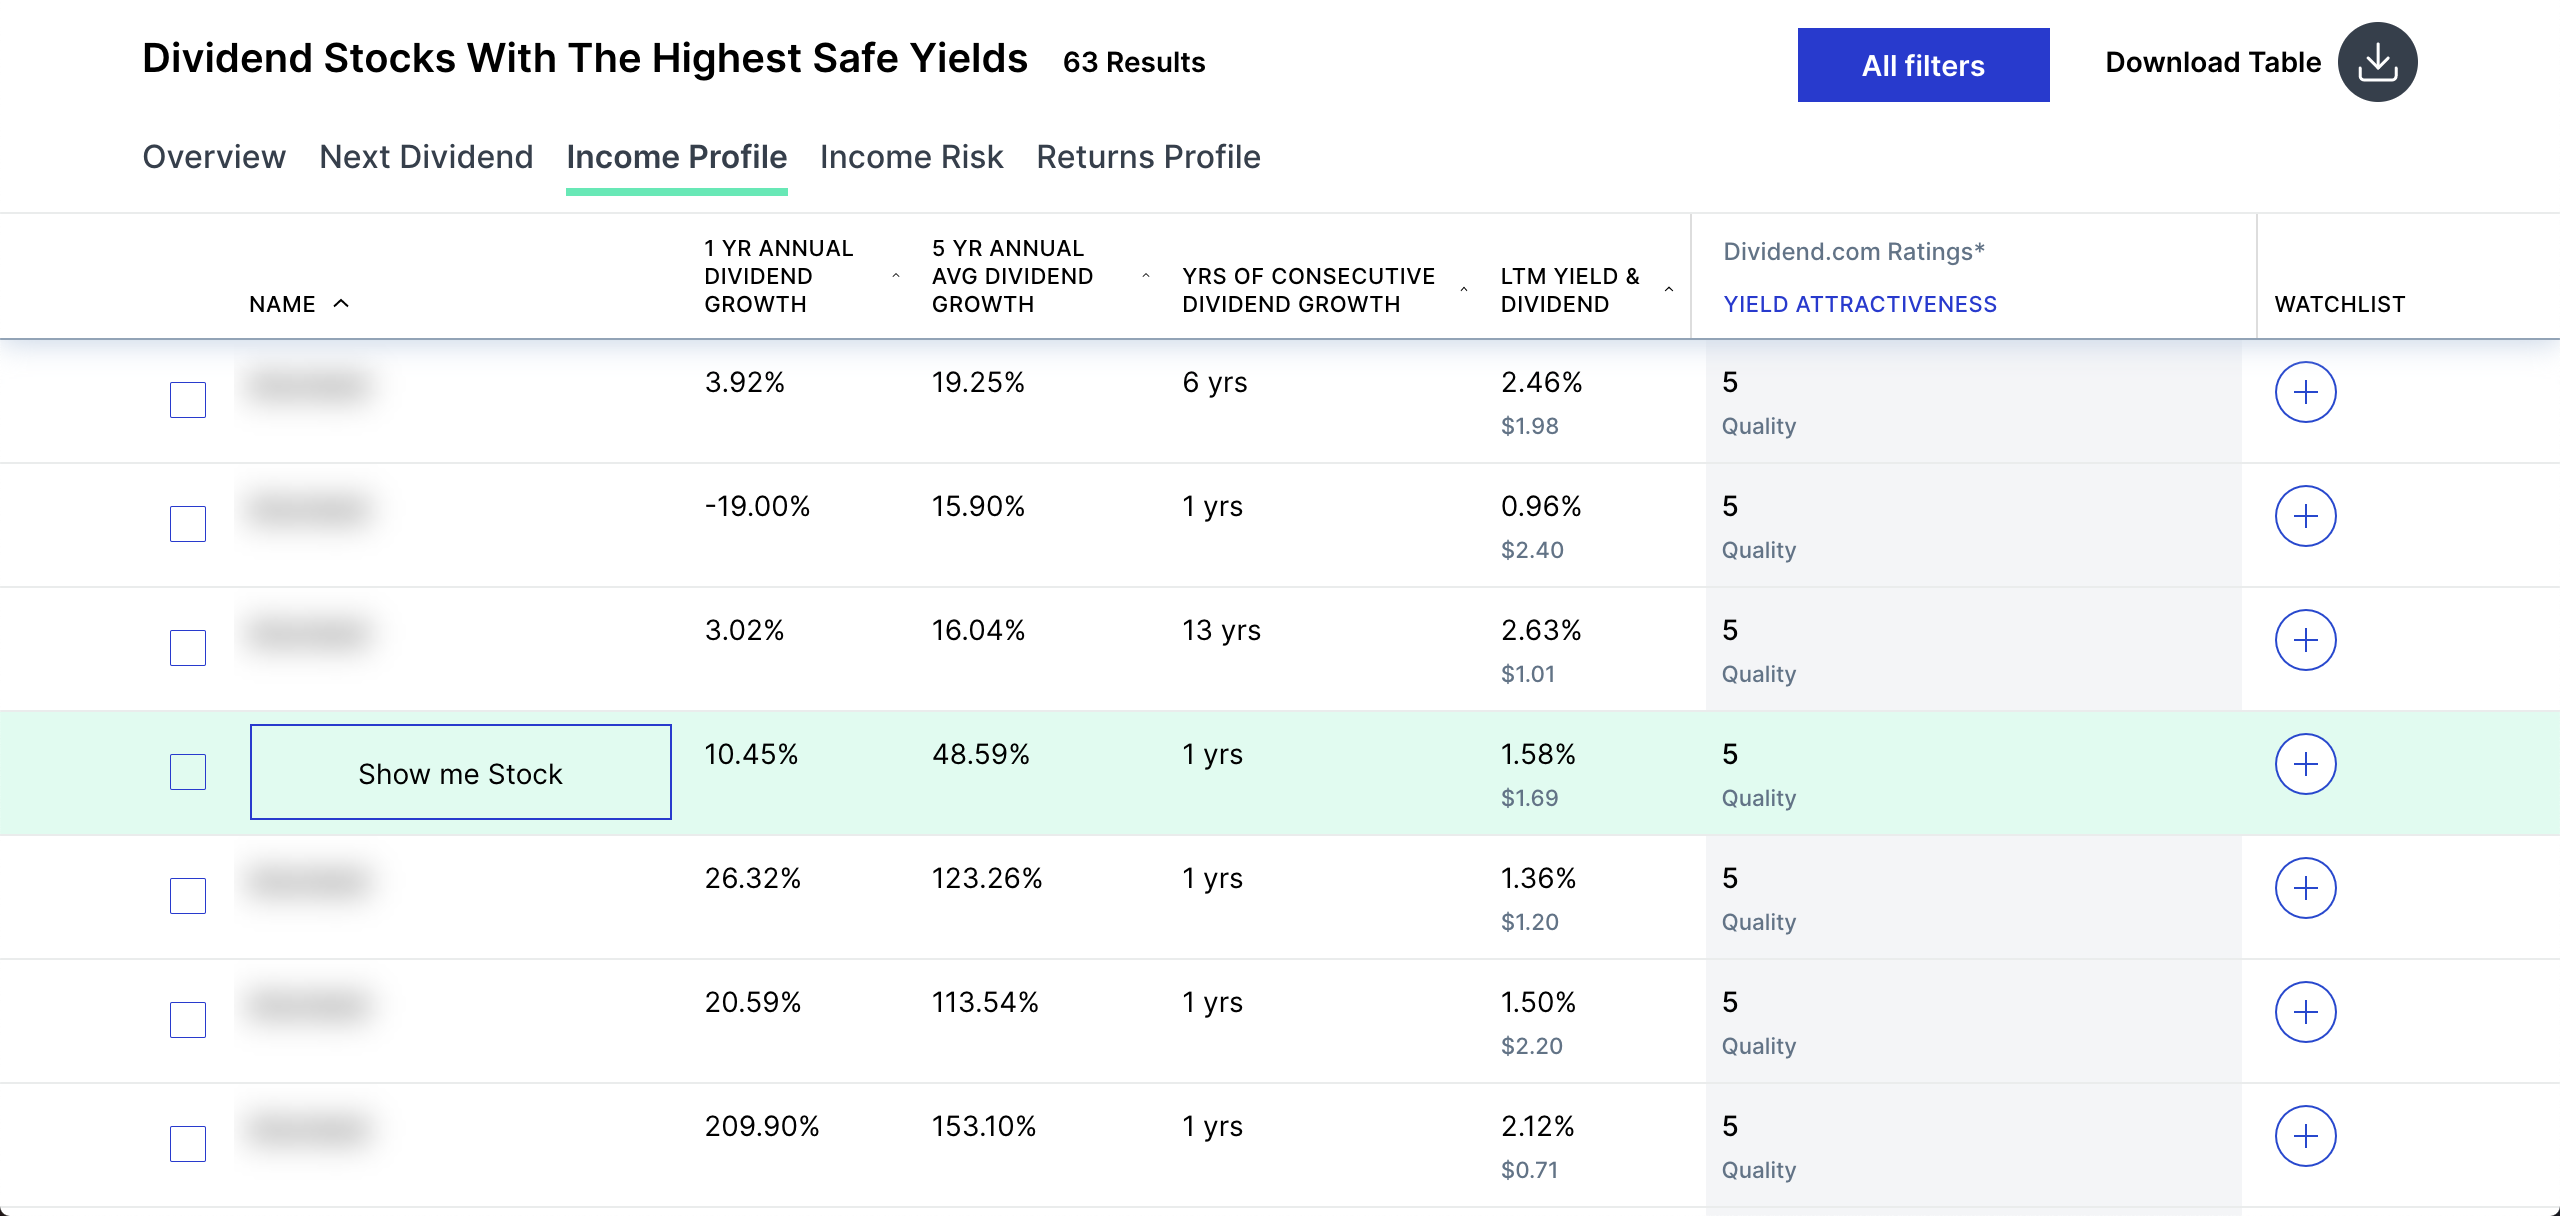 Dividend Stocks With The Highest Safe Yields - Nov 30 2020